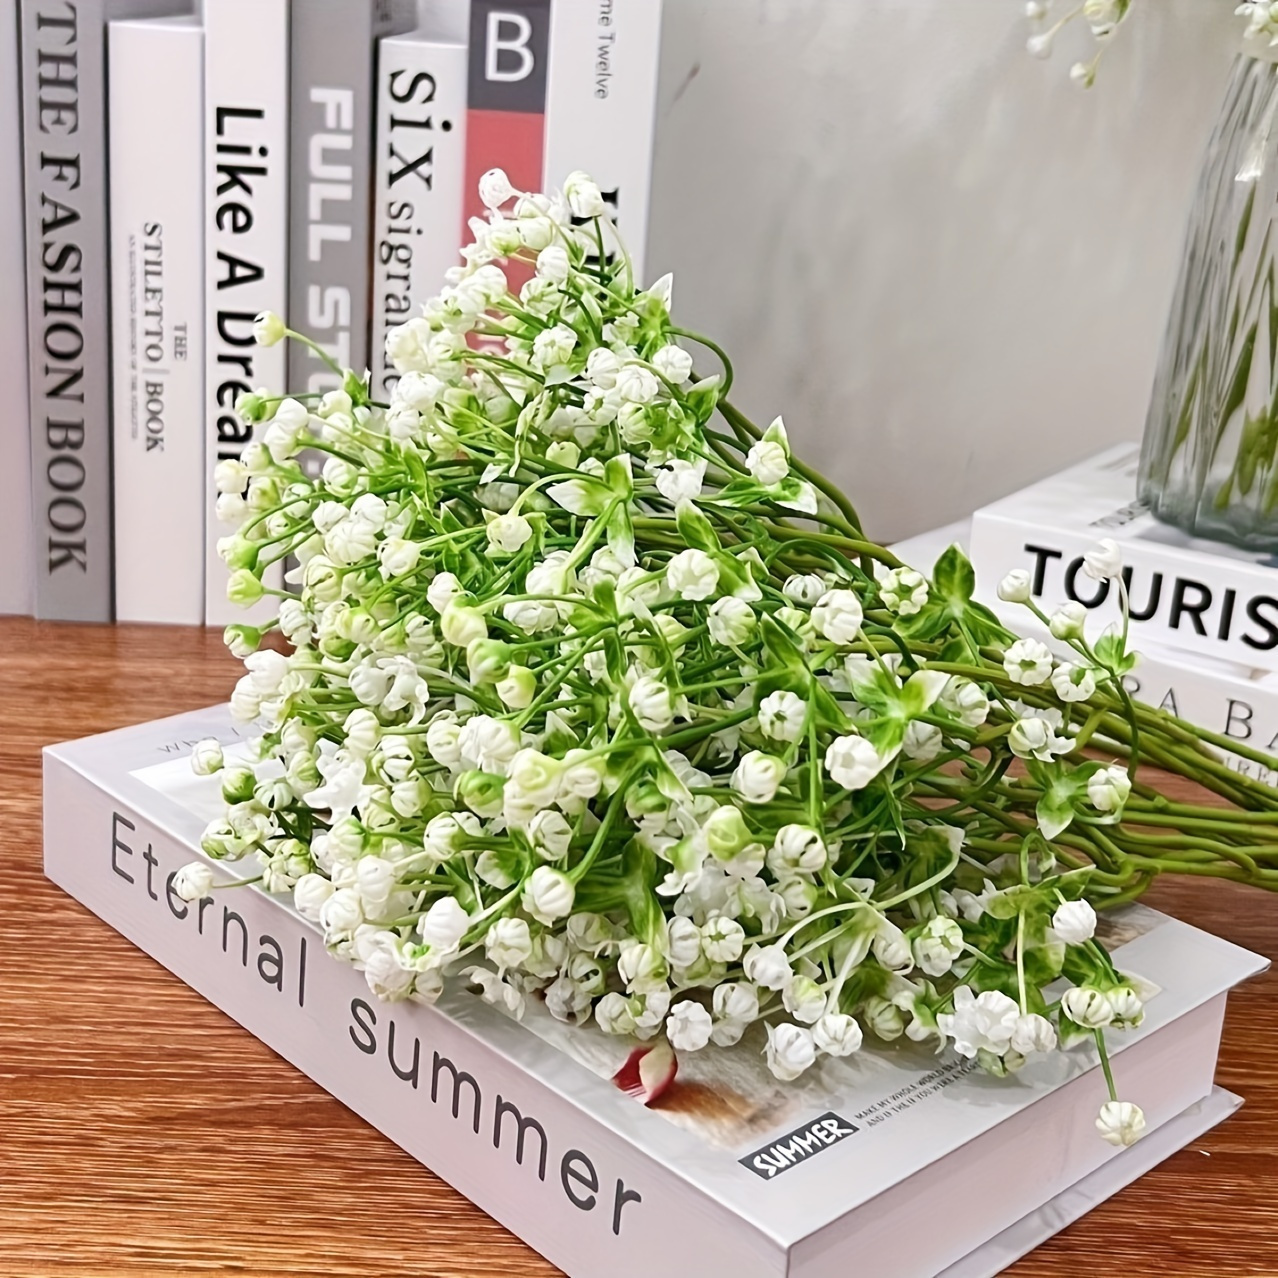 5PCS Long Stem Artificial Baby Breath Flowers Fake Real Touch Gypsophila  for Home Office Indoor 